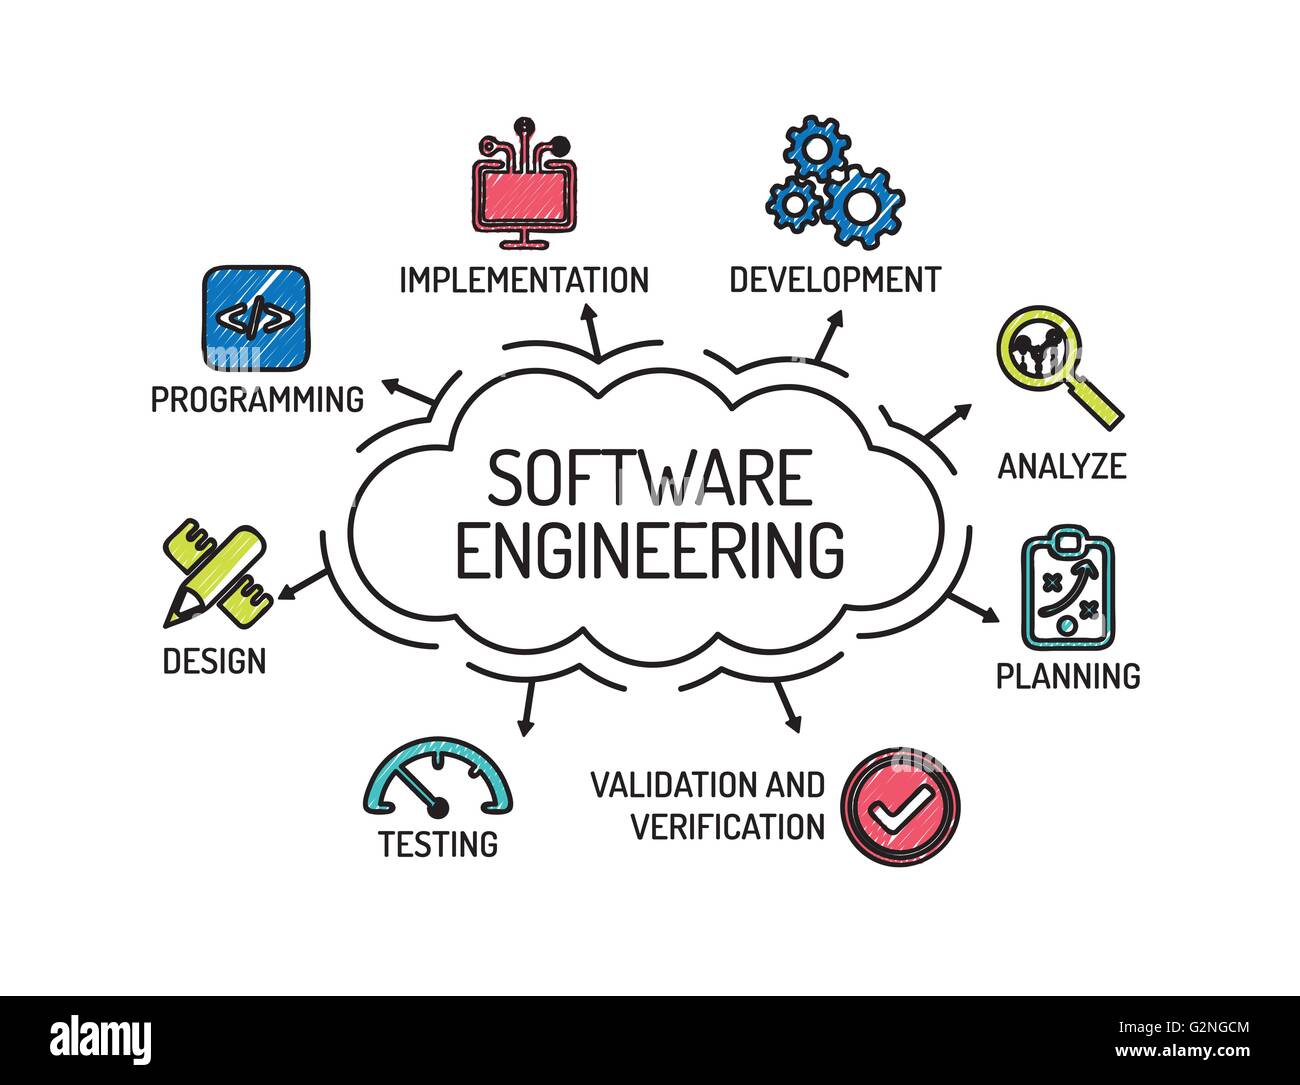 Software Engineering. Chart with keywords and icons. Sketch Stock Vector